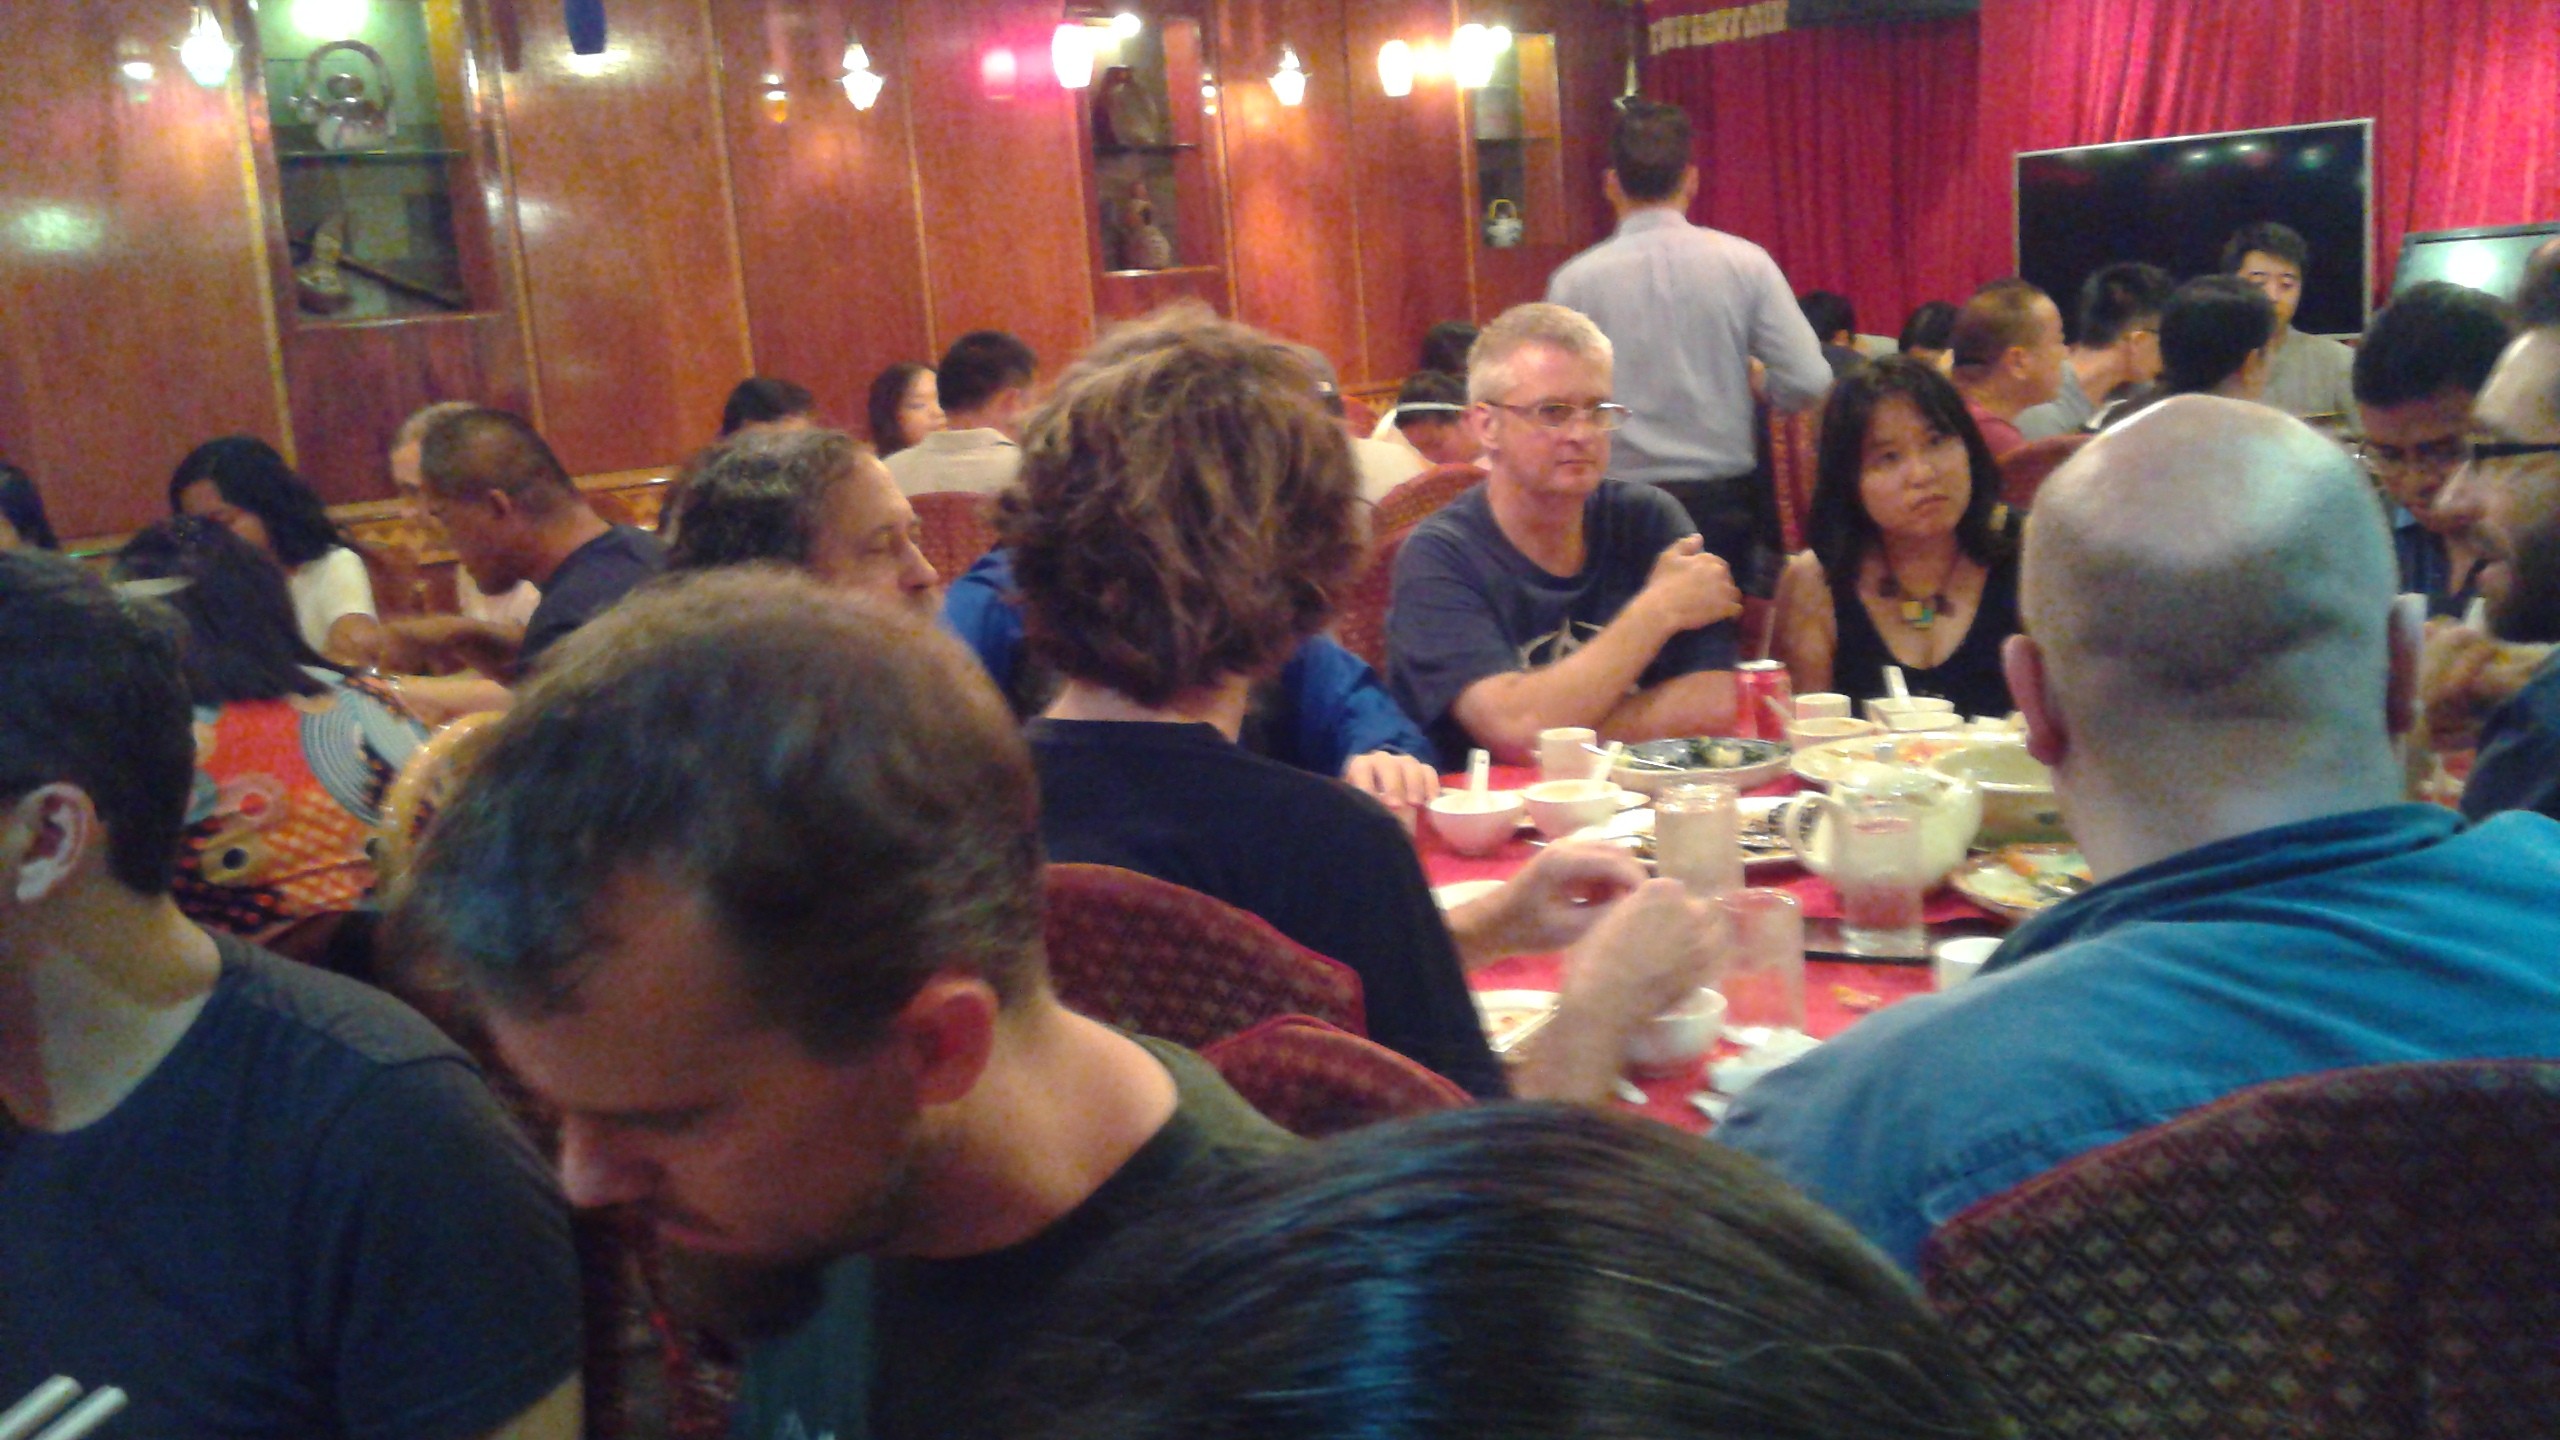 Richard Stallman and others discuss free software over lunch.